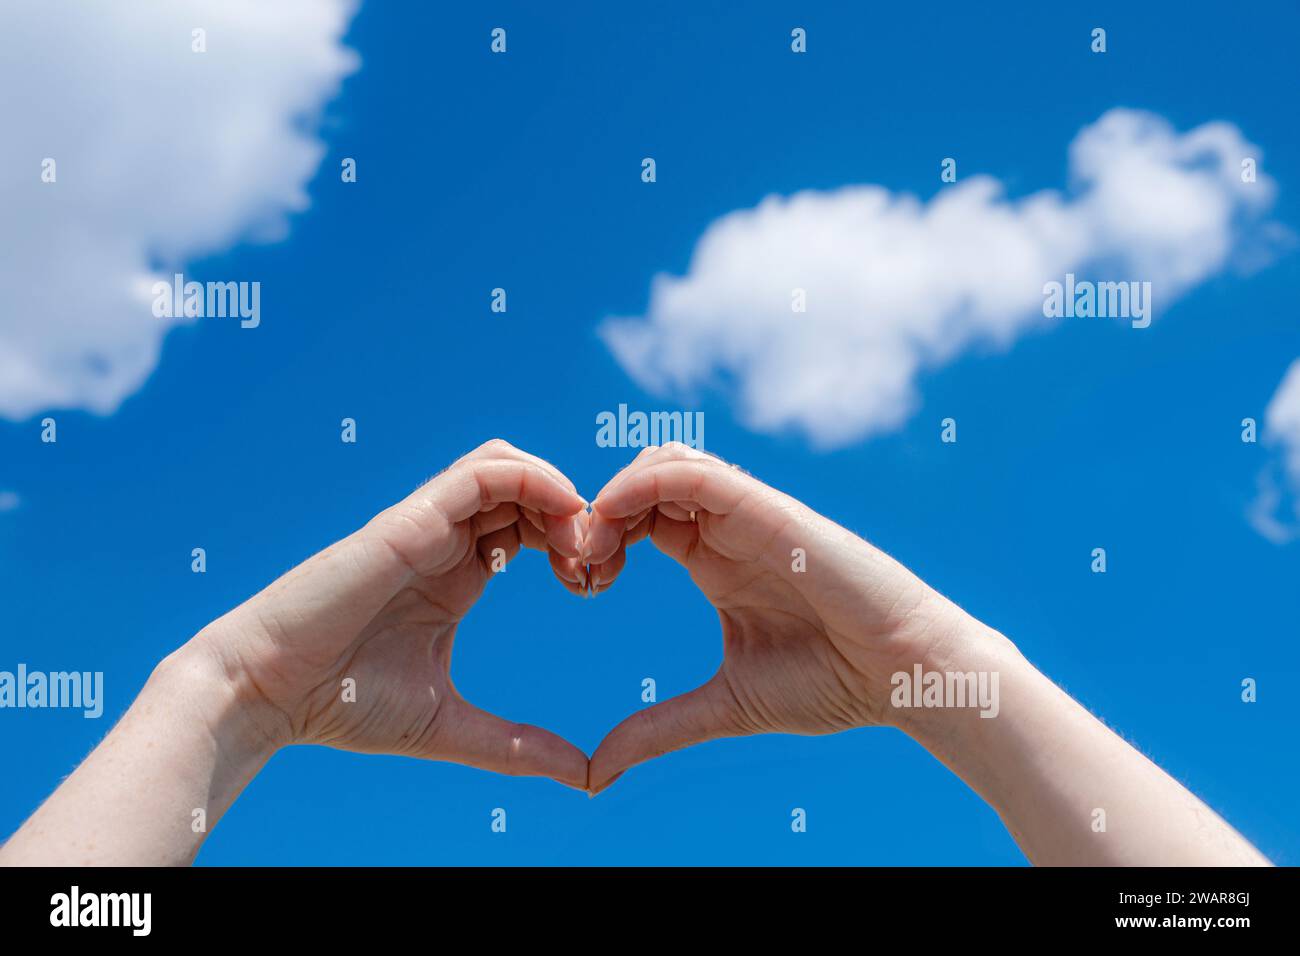 the girl shows a heart with her hands against the background of the sky Stock Photo